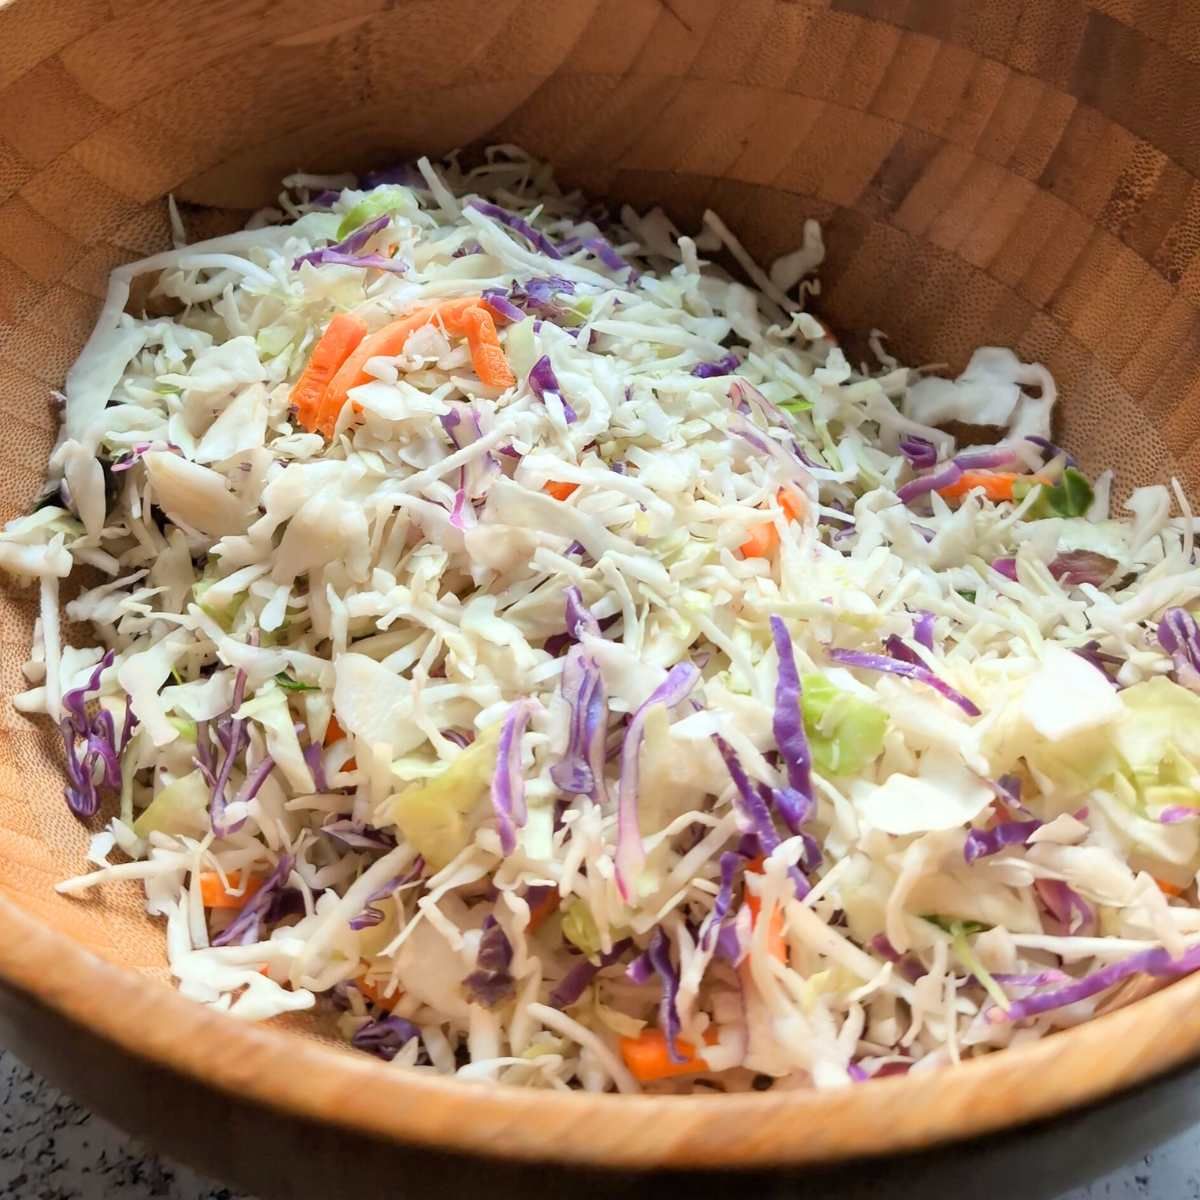 a wooden serving bowl full of coleslaw mix.